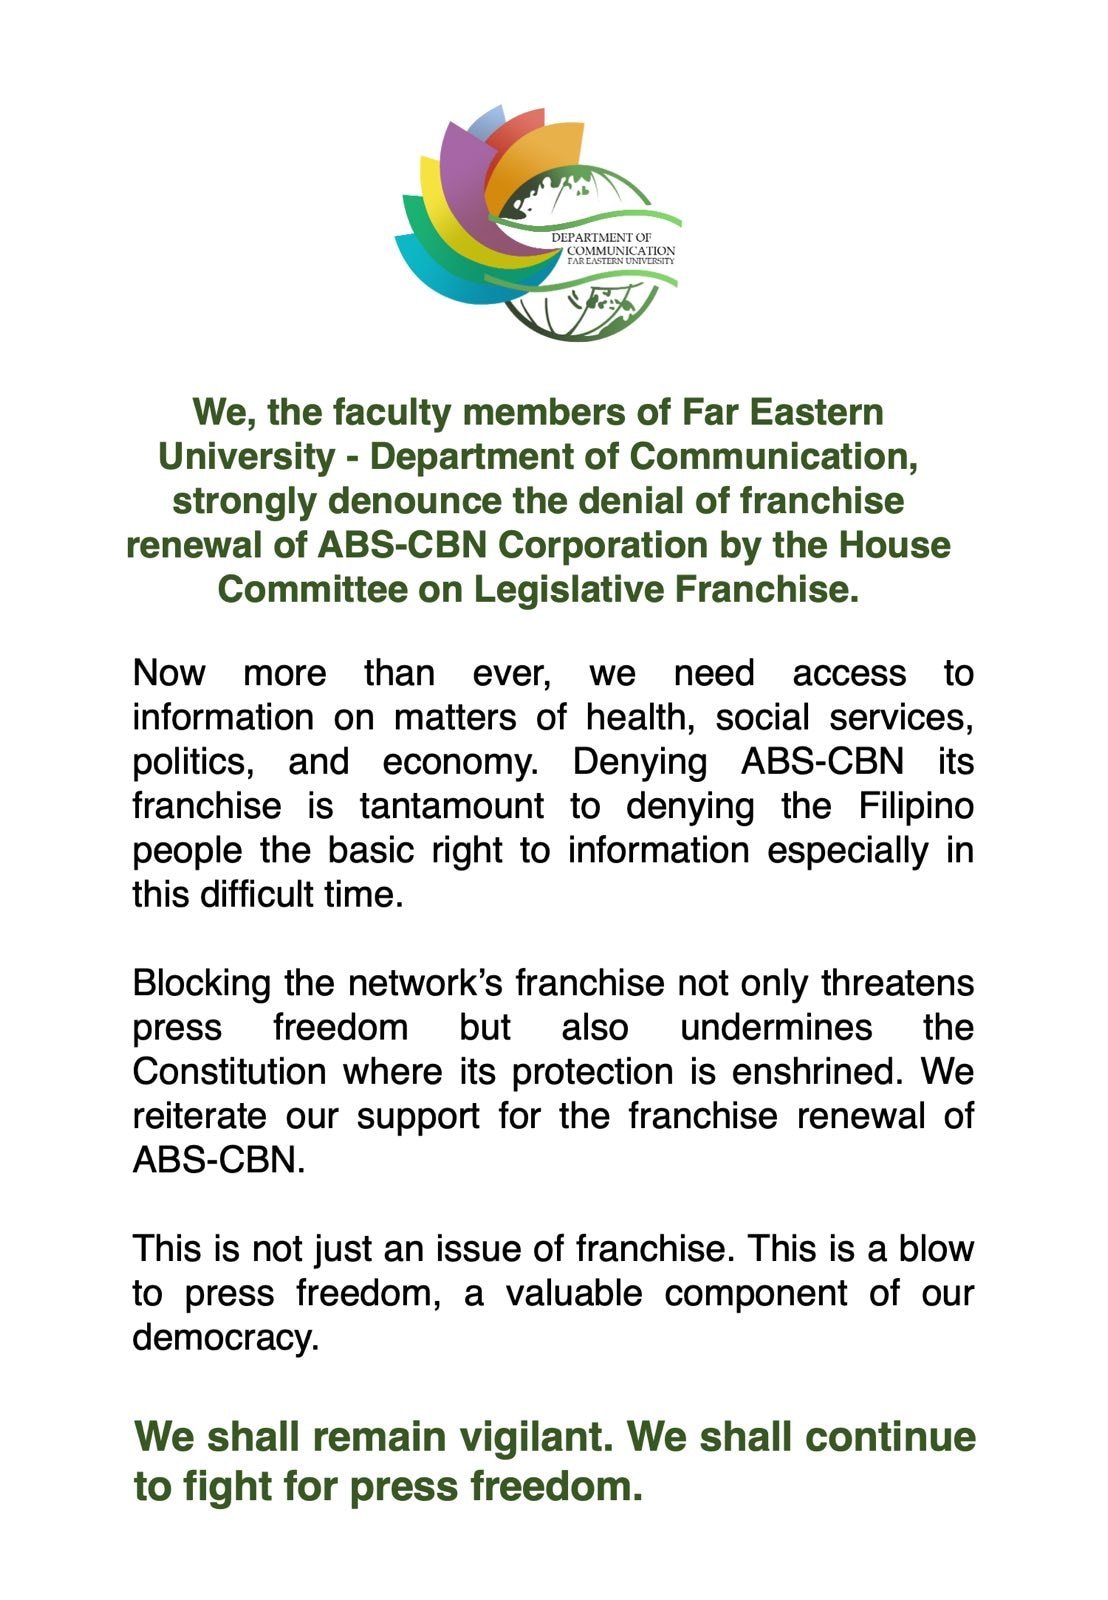 READ: Journalists, news groups issue statements supporting ABS-CBN 7